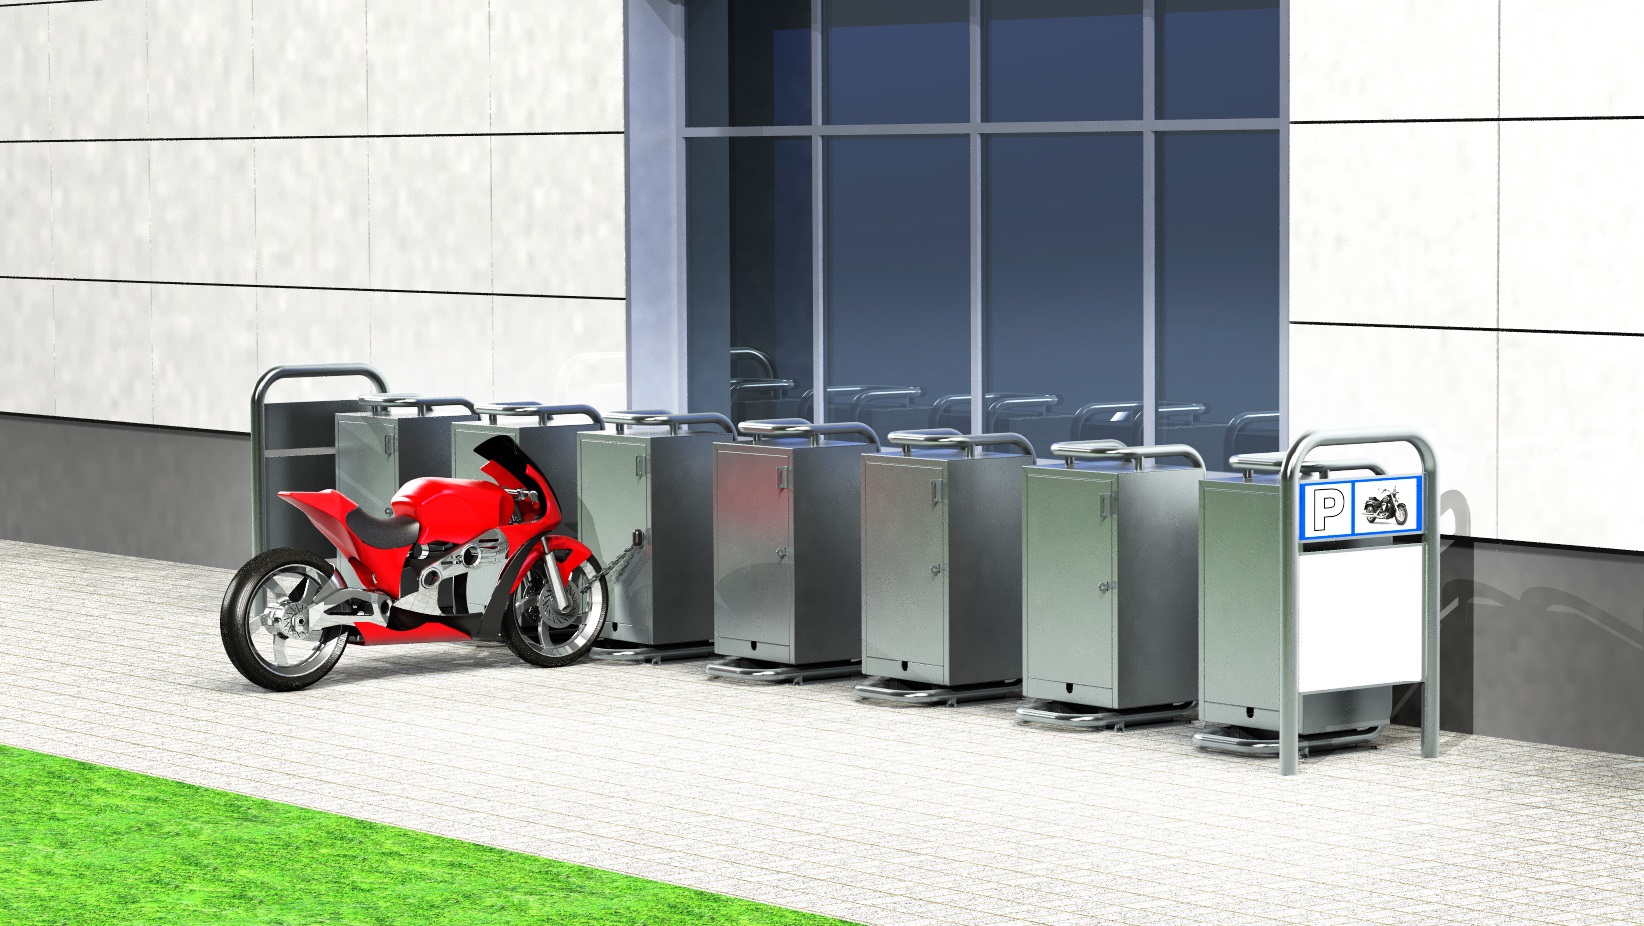 MotoPark: Safe and Convenient Motorcycle Storage